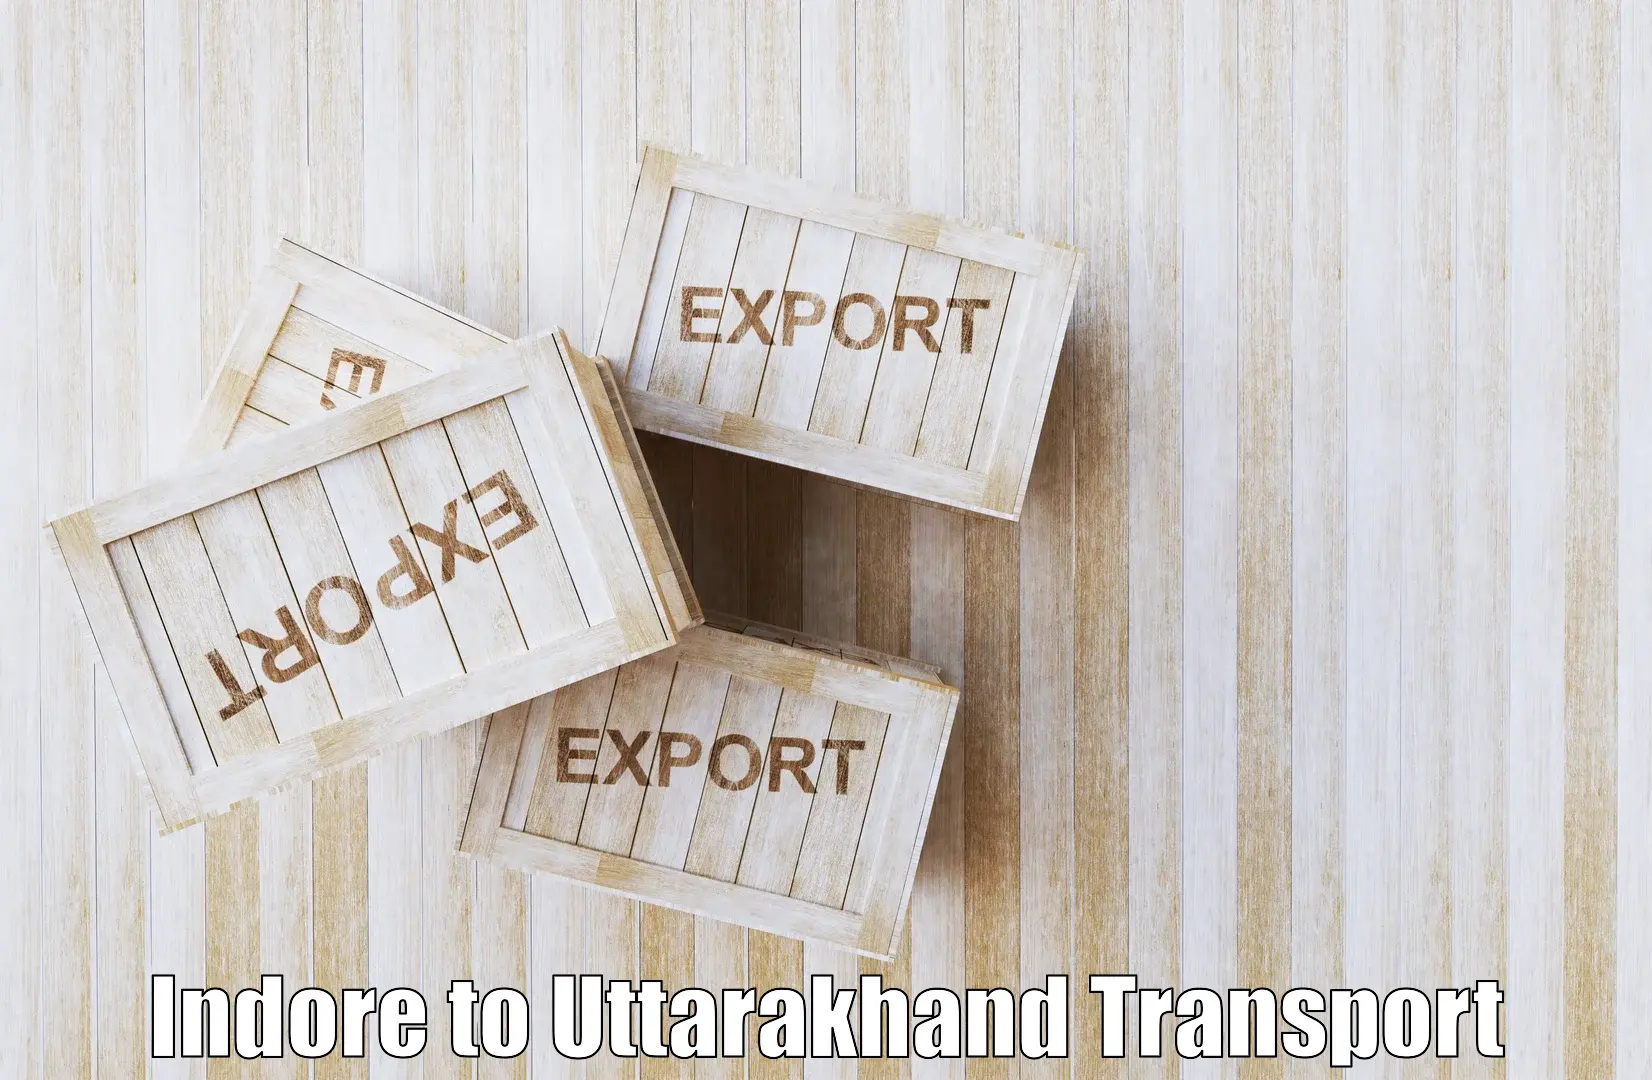 Air freight transport services Indore to IIT Roorkee